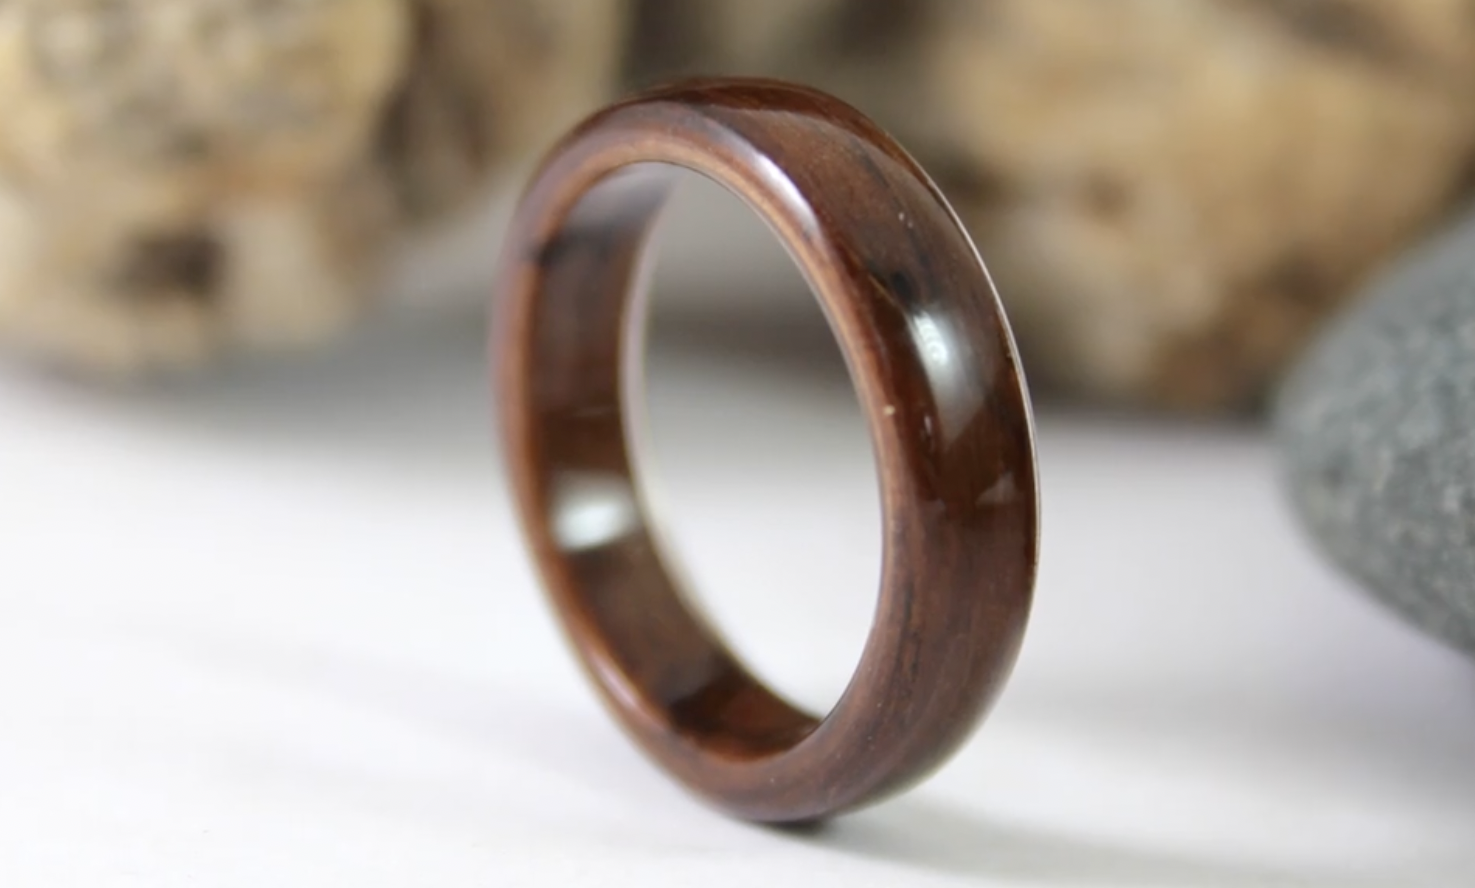 Guide: How to Make a Wooden Ring with Simple Tools